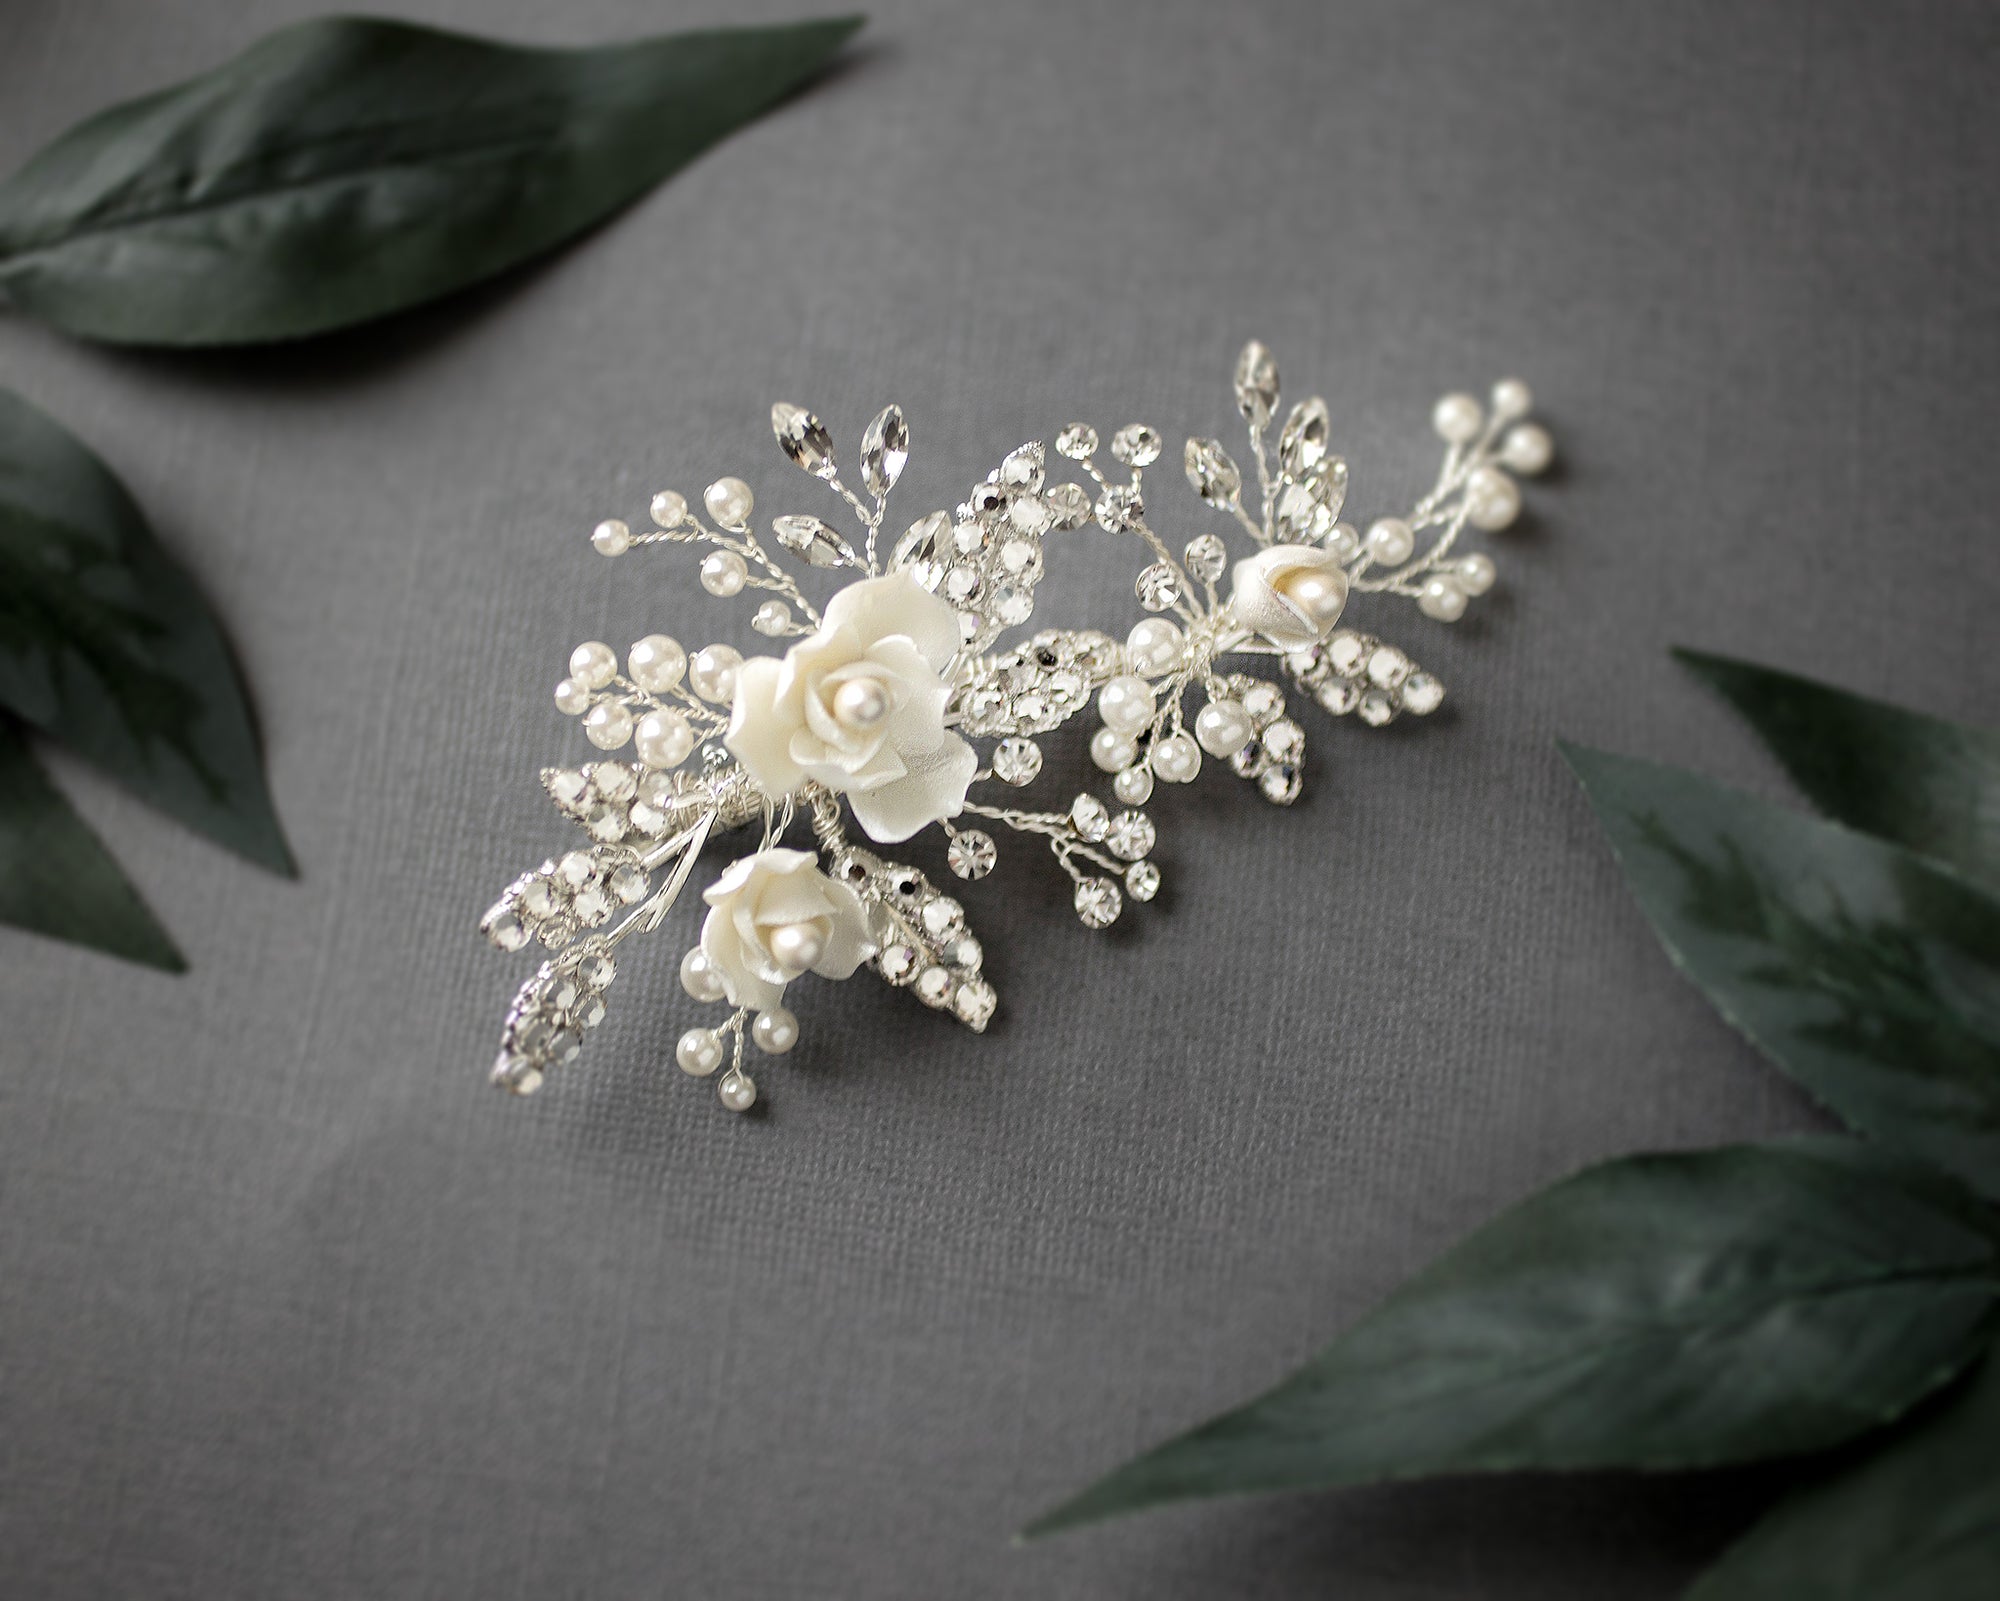 Gold and Rose Gold Bridal Hair Accessories - Cassandra Lynne